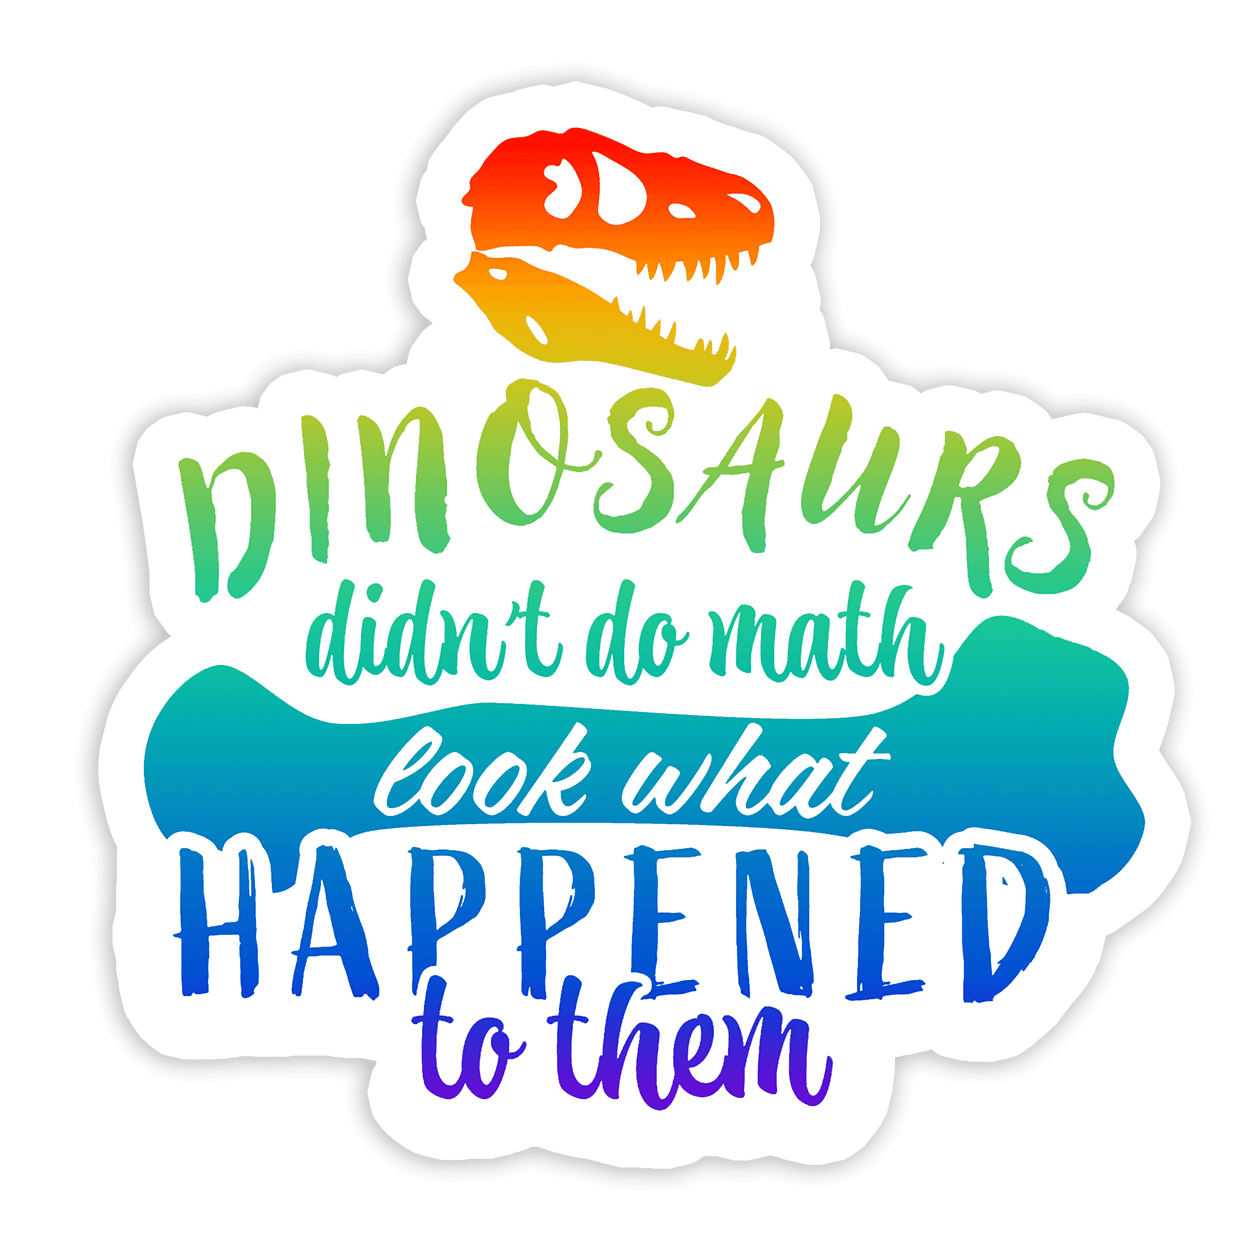 Image of a vinyl sticker that is 3 inch on its longest side with a math and dinosuaur theme